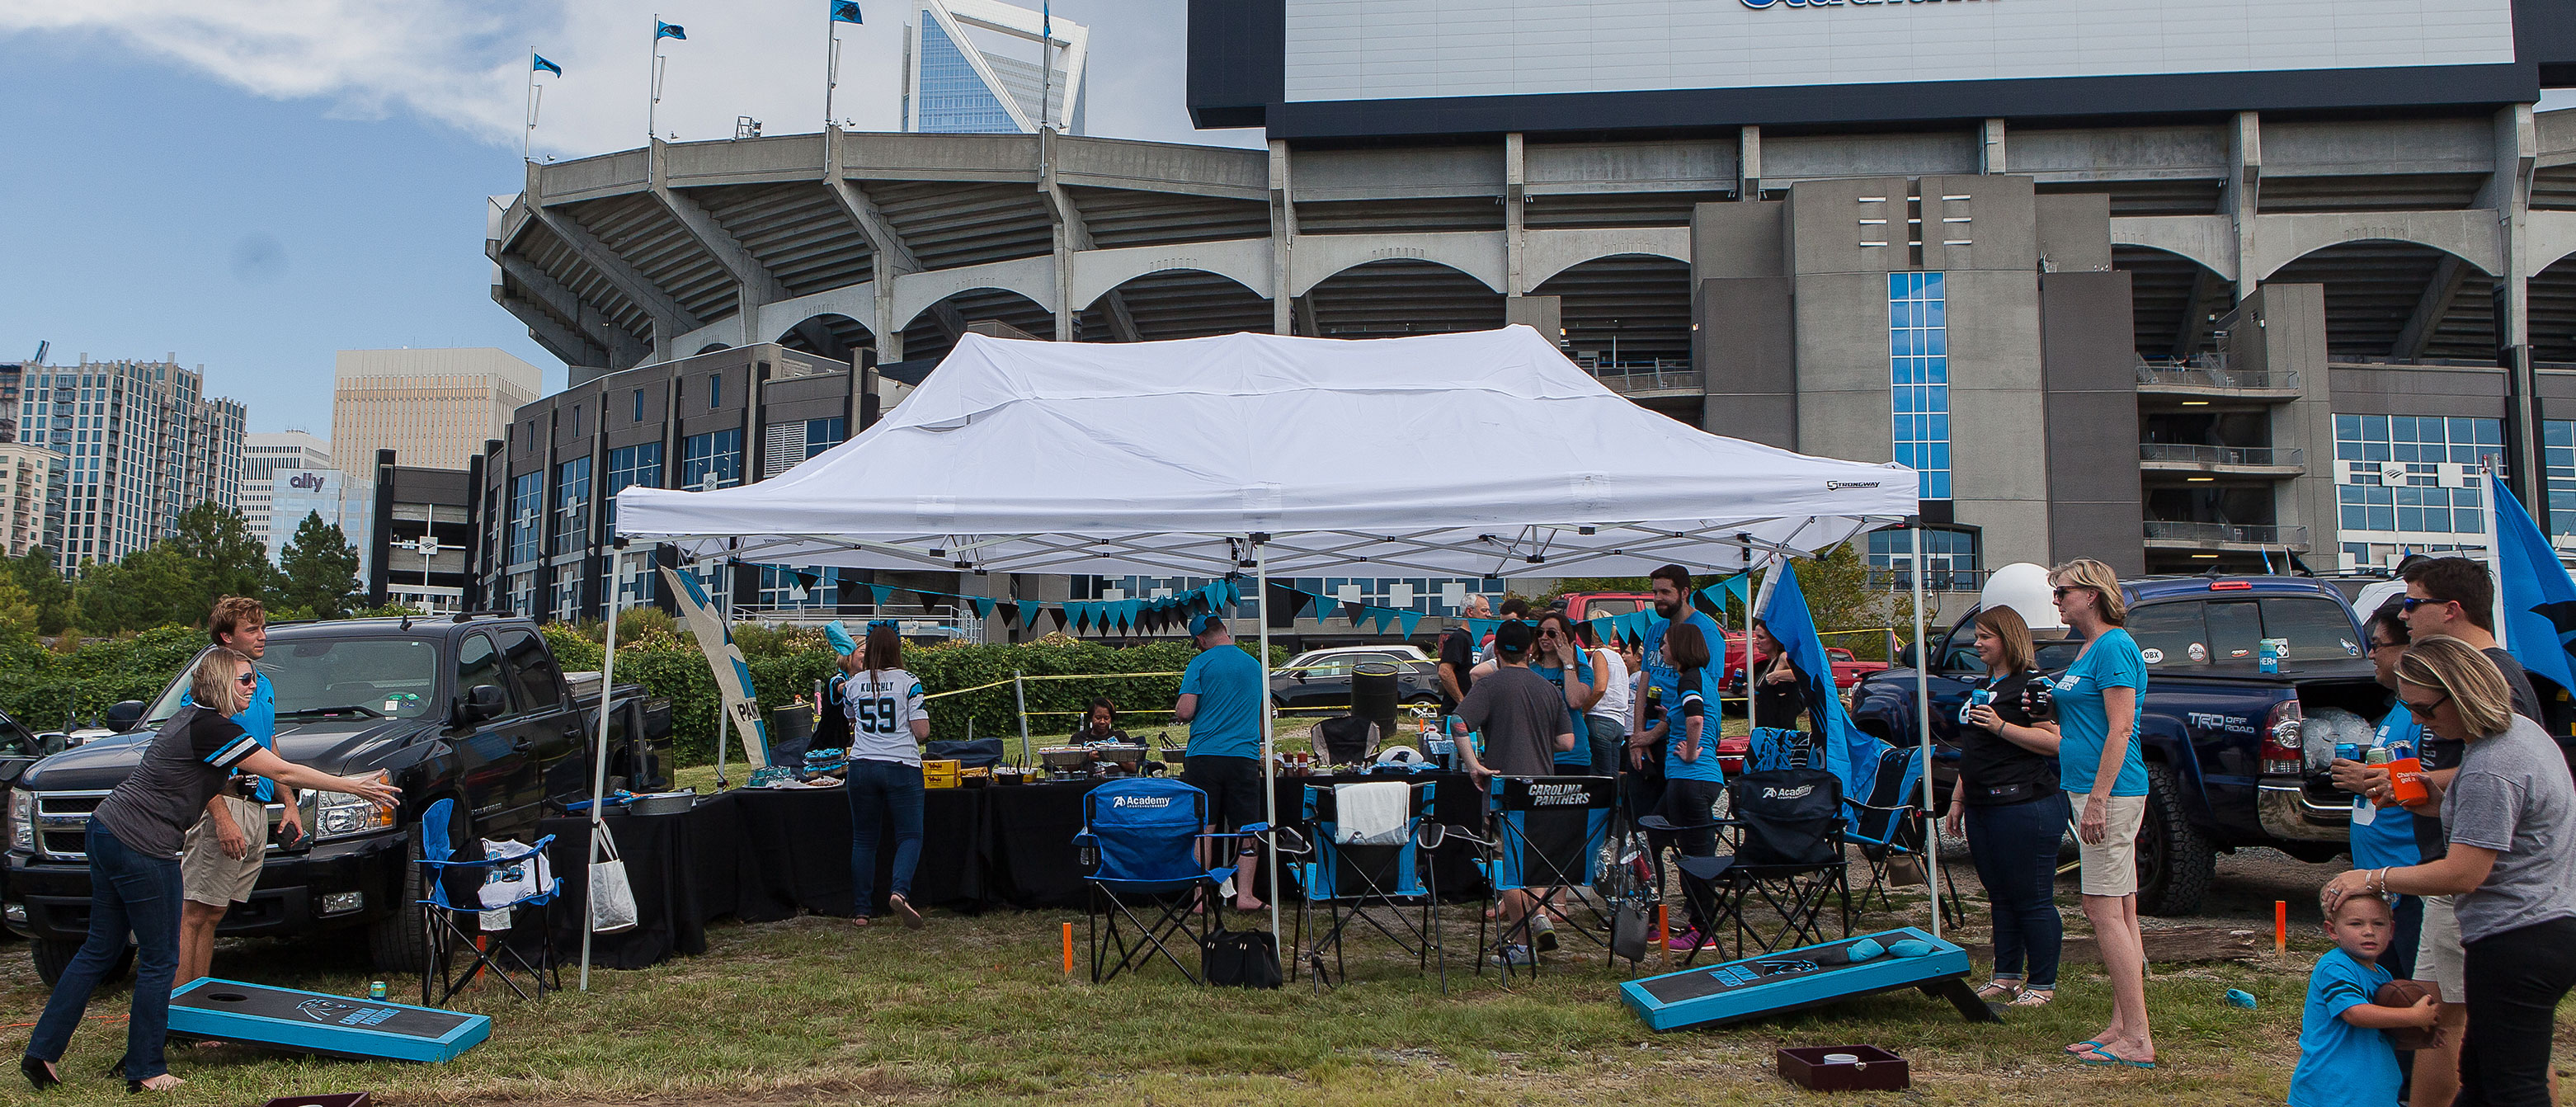 event-tailgating-services-tailgate-trailer-rentals